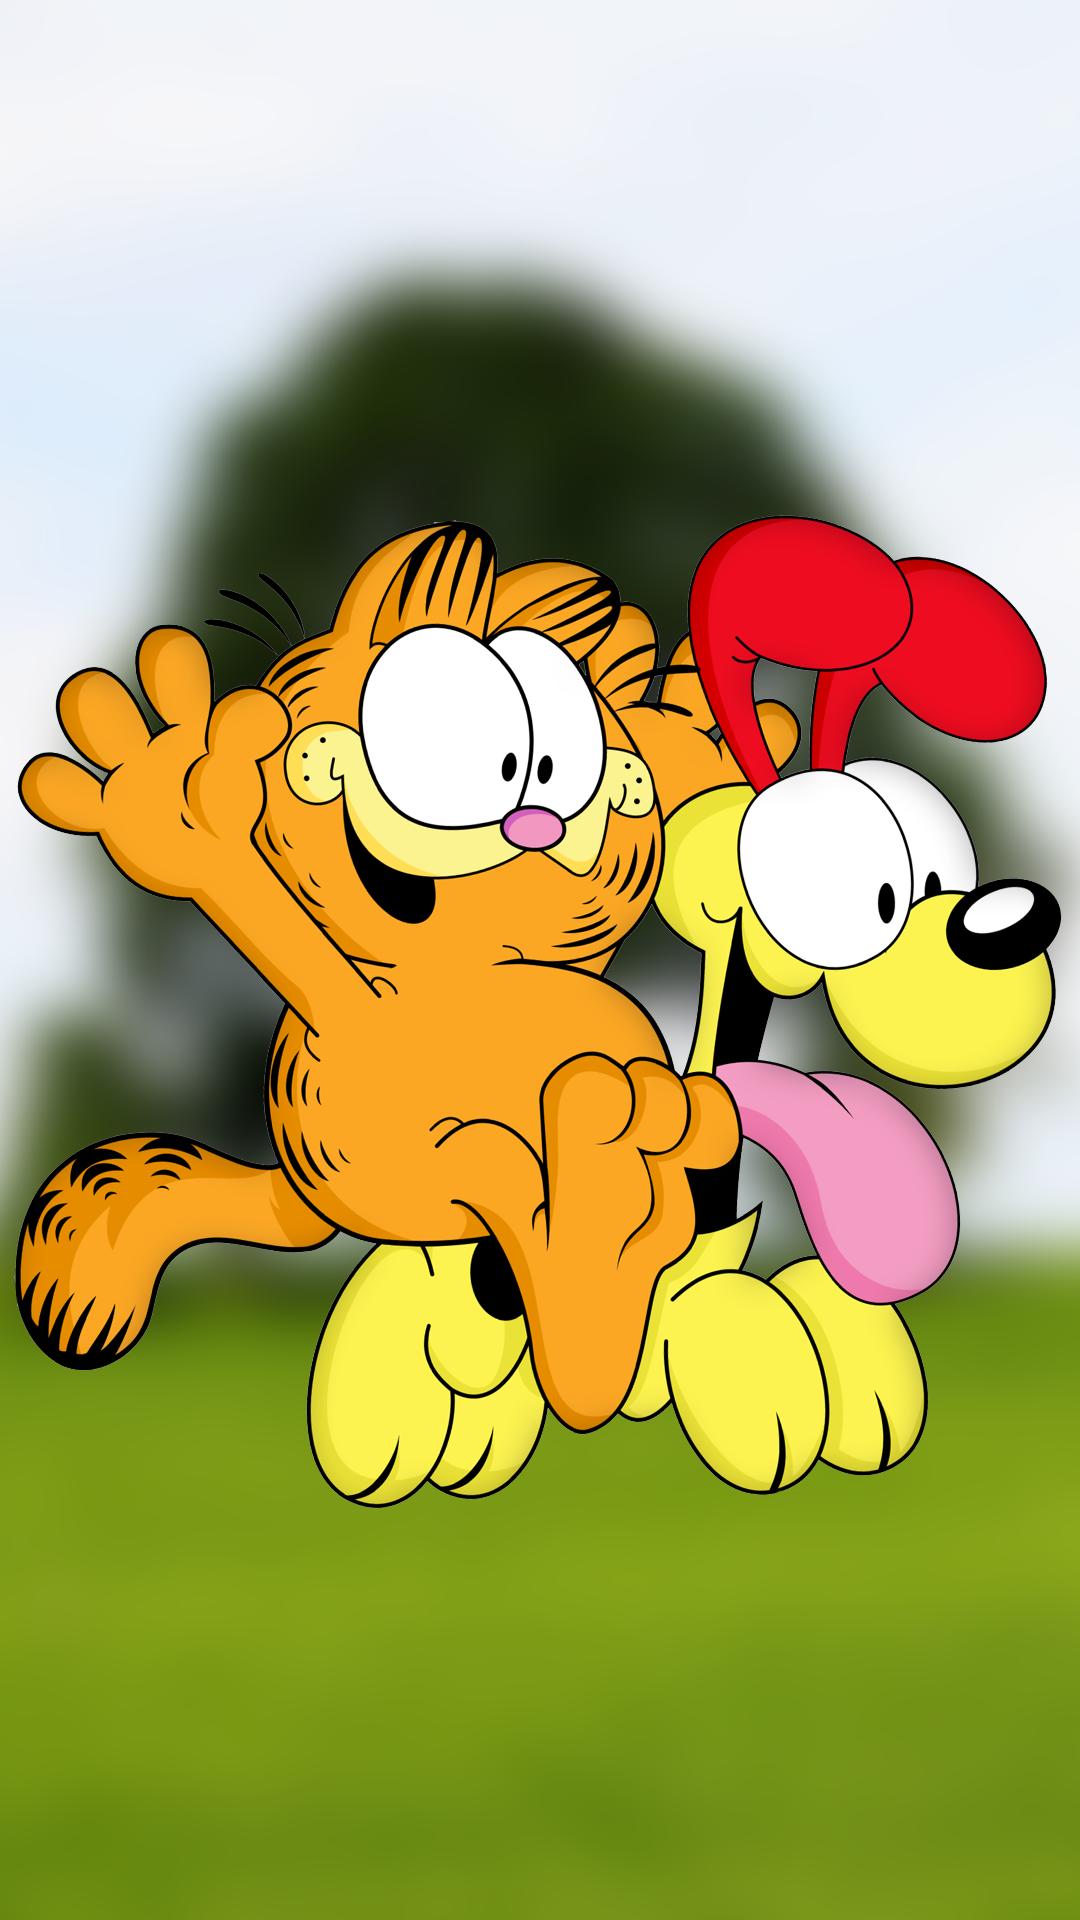 1080 x 1920 · png - Ultra HD Garfield Cartoon Wallpaper For Your Mobile Phone ...0108